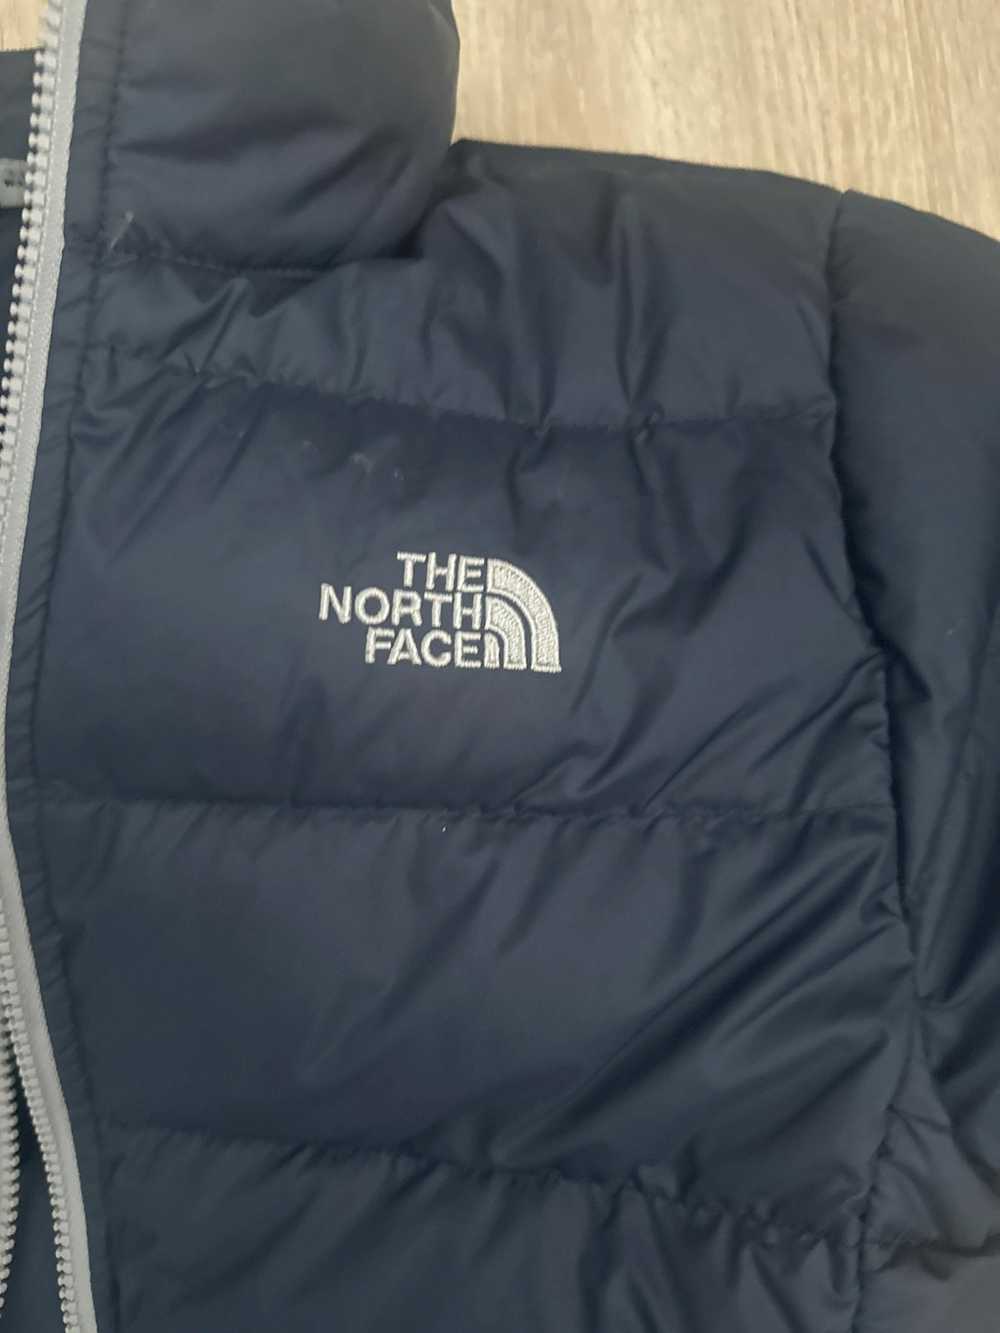 The North Face Navy Northface Jacket - image 2